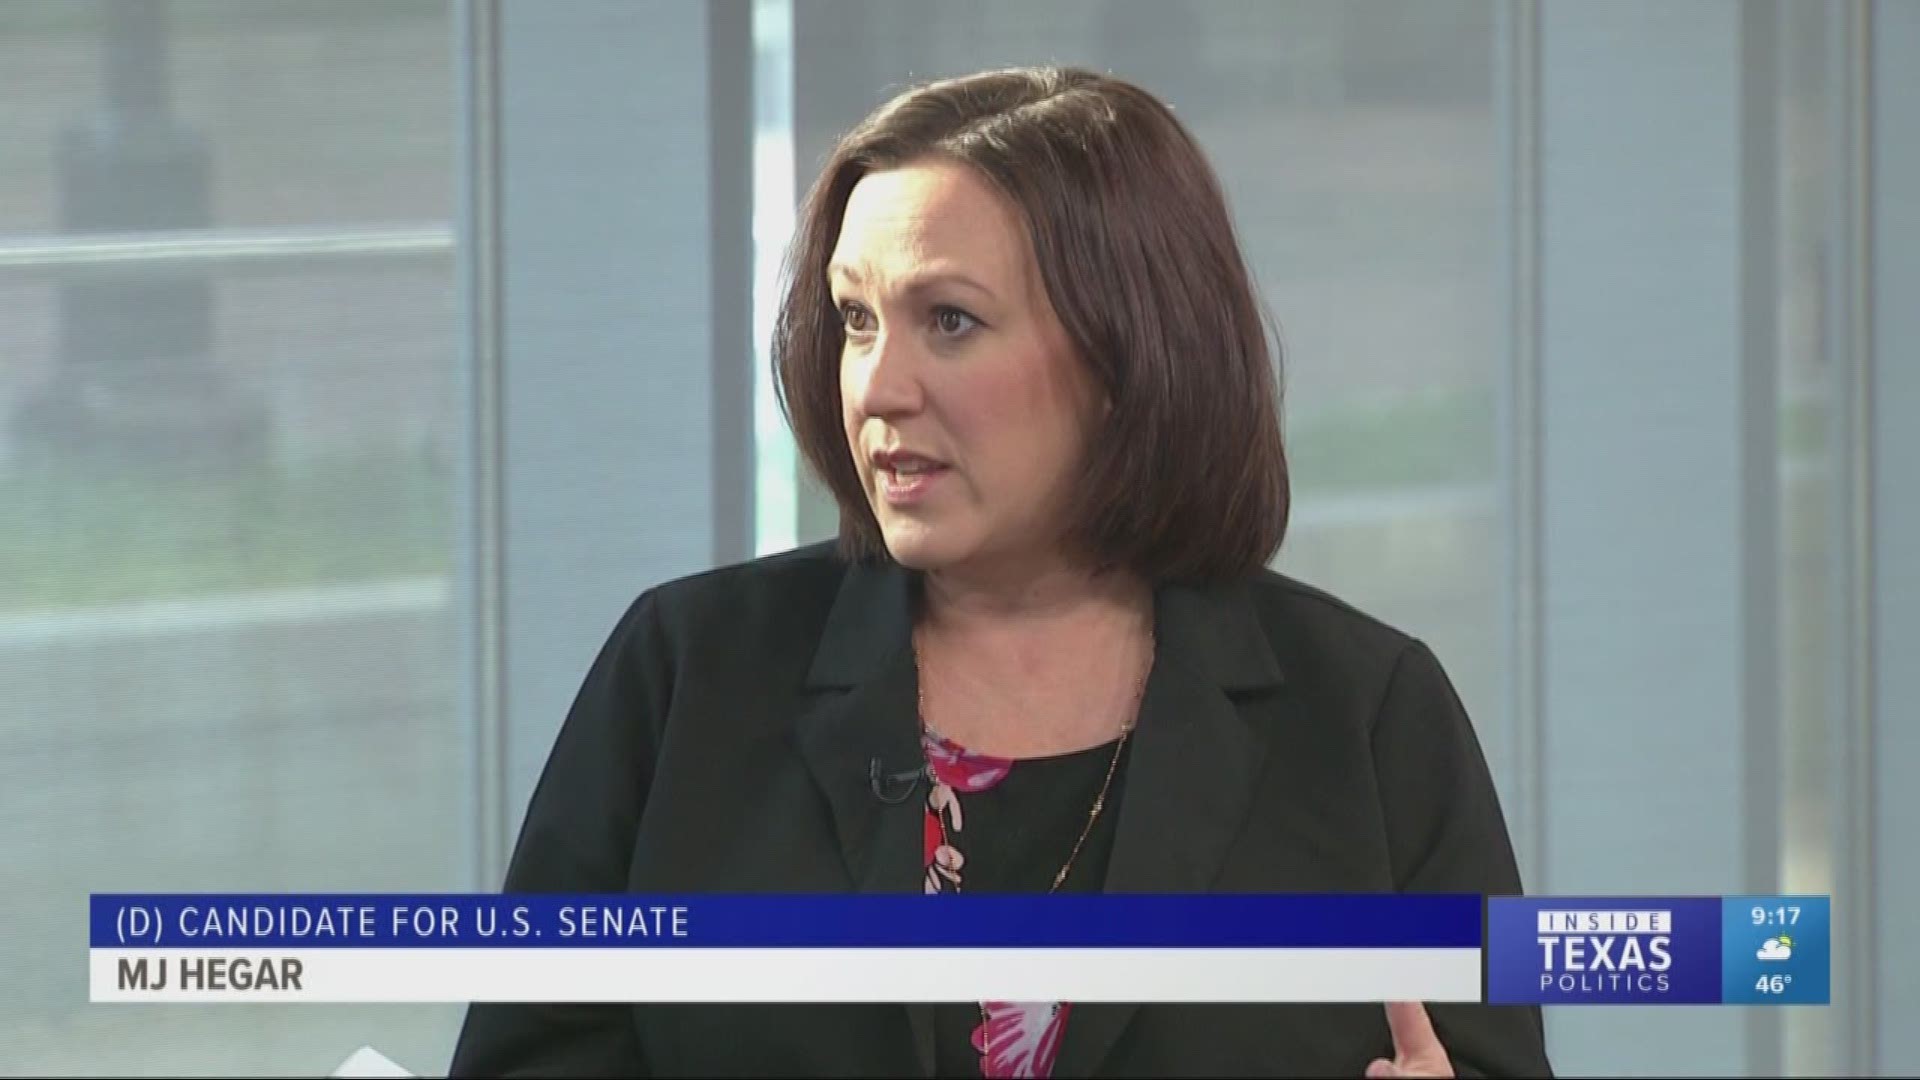 Inside Texas Politics has introduced the Democrats campaigning for one of Texas' U.S. Senate seats over the last few months. MJ Hegar is one of those candidates.